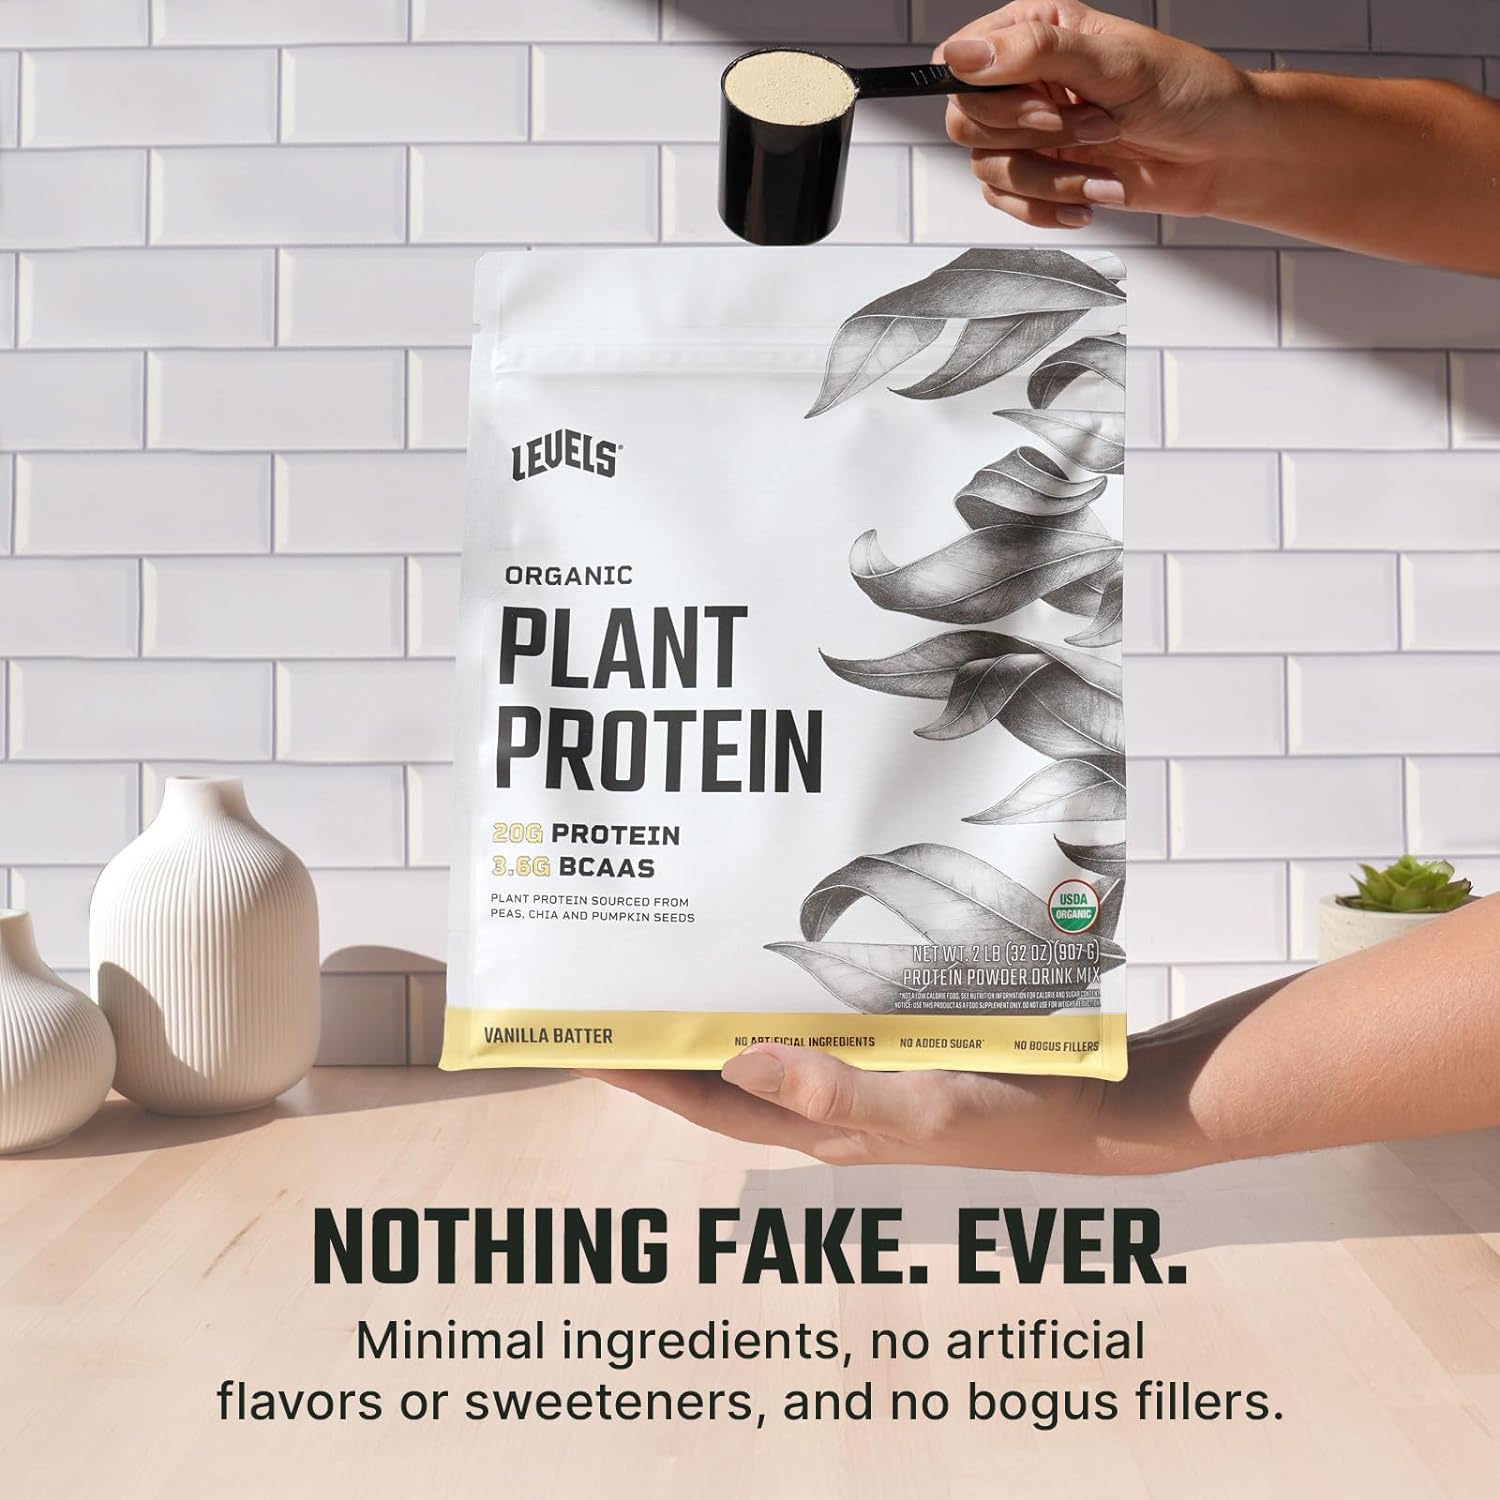 Levels Organic Plant Protein, 20G of Protein, No Artificials, Vanilla Batter, 2LB : Everything Else